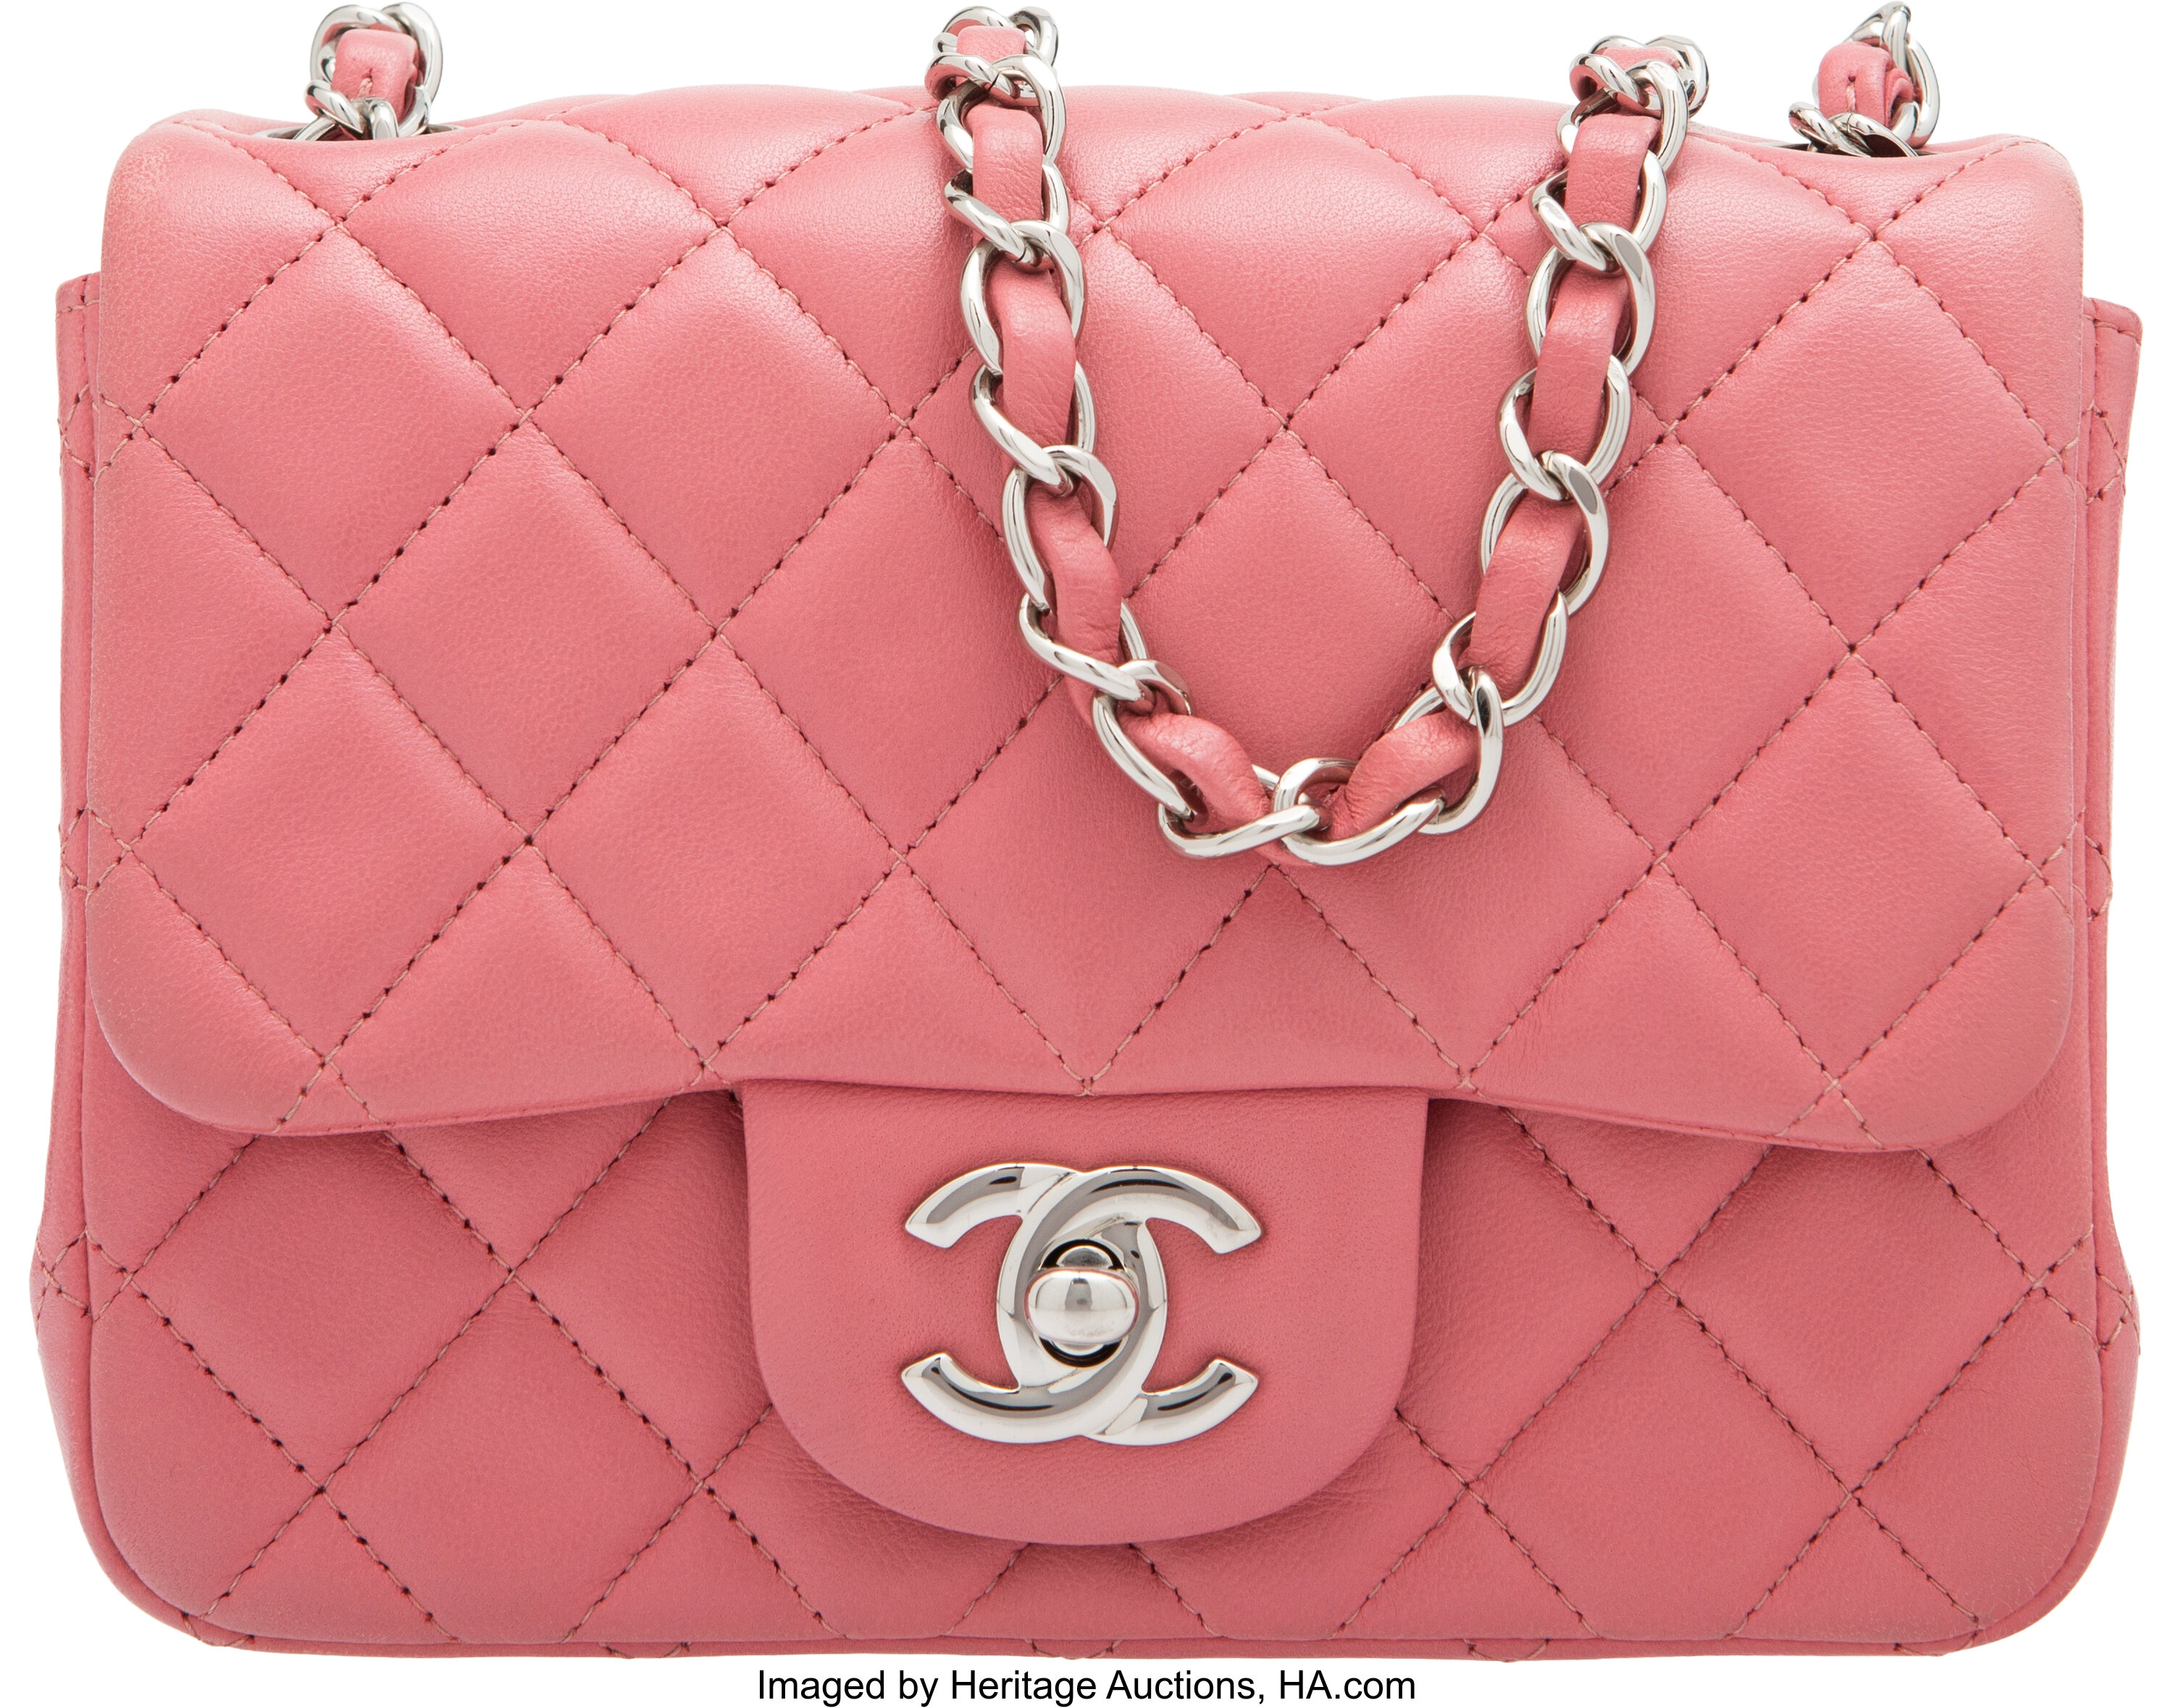 Sold at Auction: CHANEL CLASSIC MINI FLAP BAG